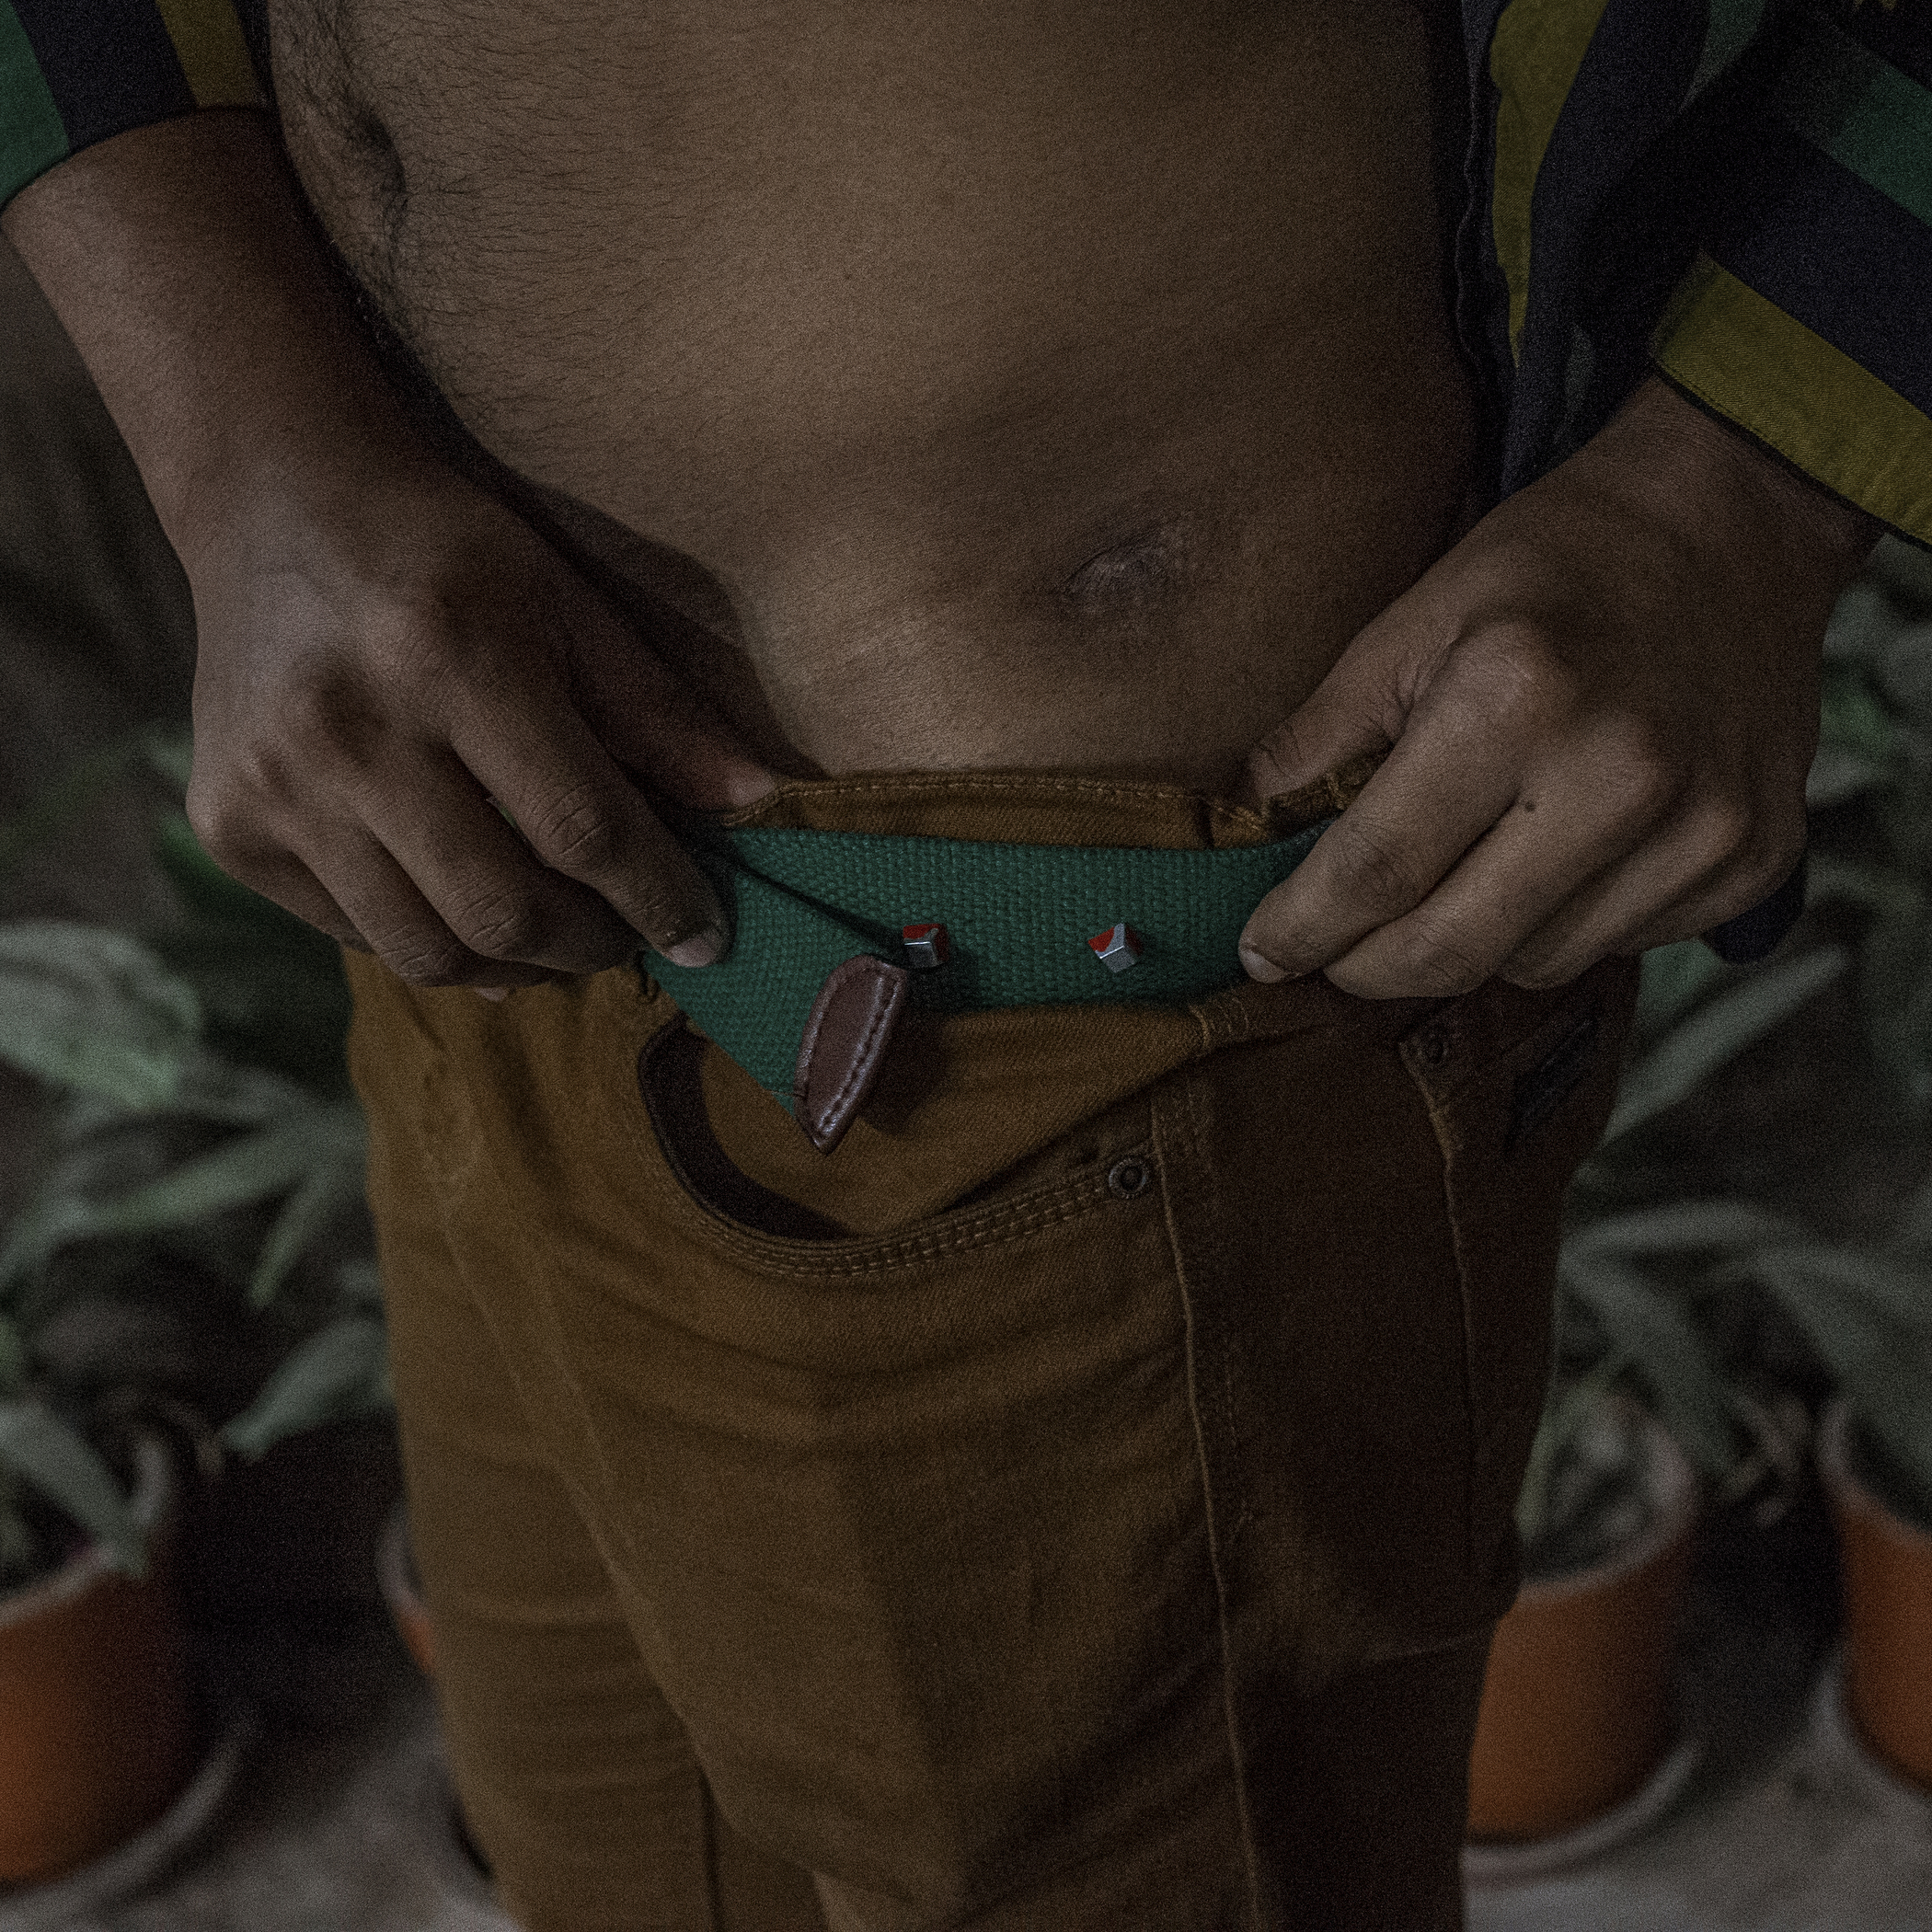 Shumon lives with the scars Rana Plaza left in his mind and body. When the building collapsed, a rod pierced through his waist and injured him severely.